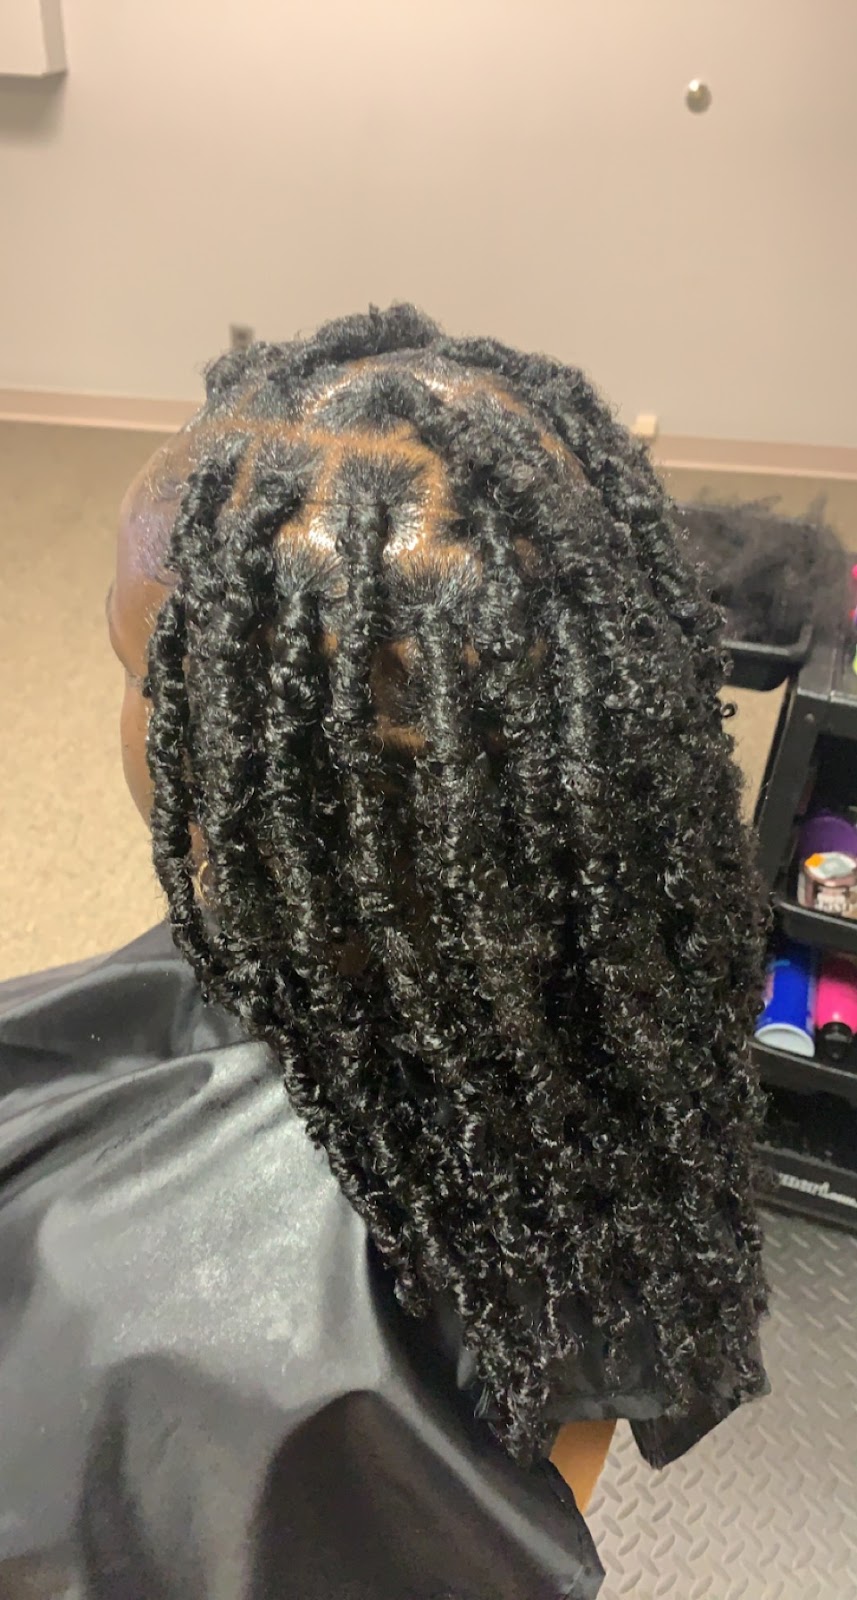 Devons Hair Braiding and Protective Styles | 3 Neptune Rd Suite A24, Poughkeepsie, NY 12601 | Phone: (845) 891-8567